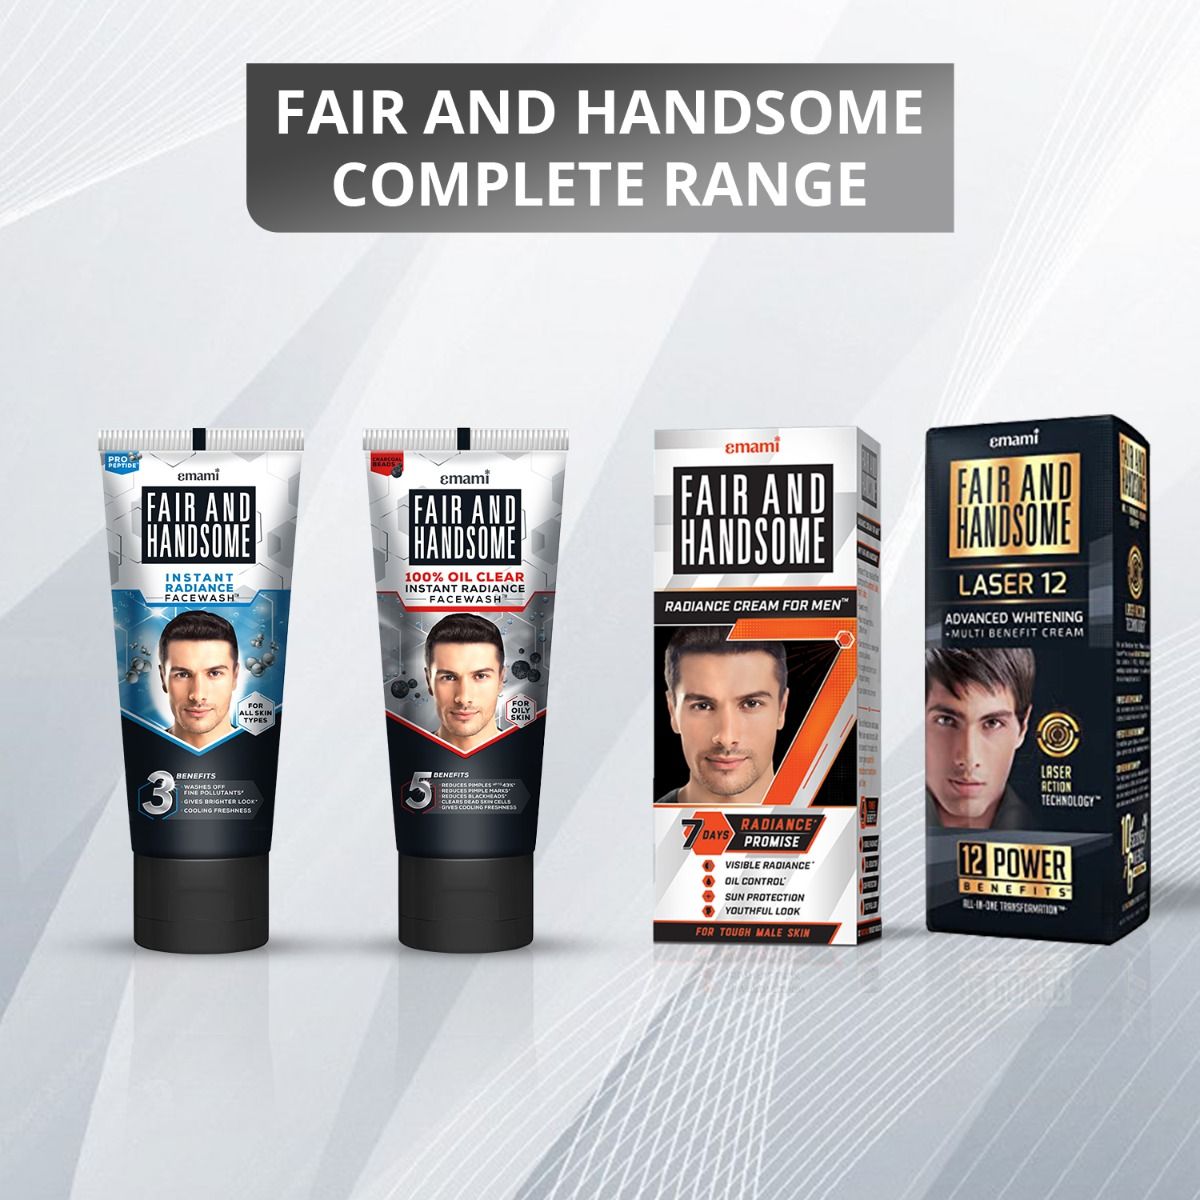 Fair and Handsome 100% Oil Clear Instant Radiance Face Wash, 50 gm, Pack of 1 